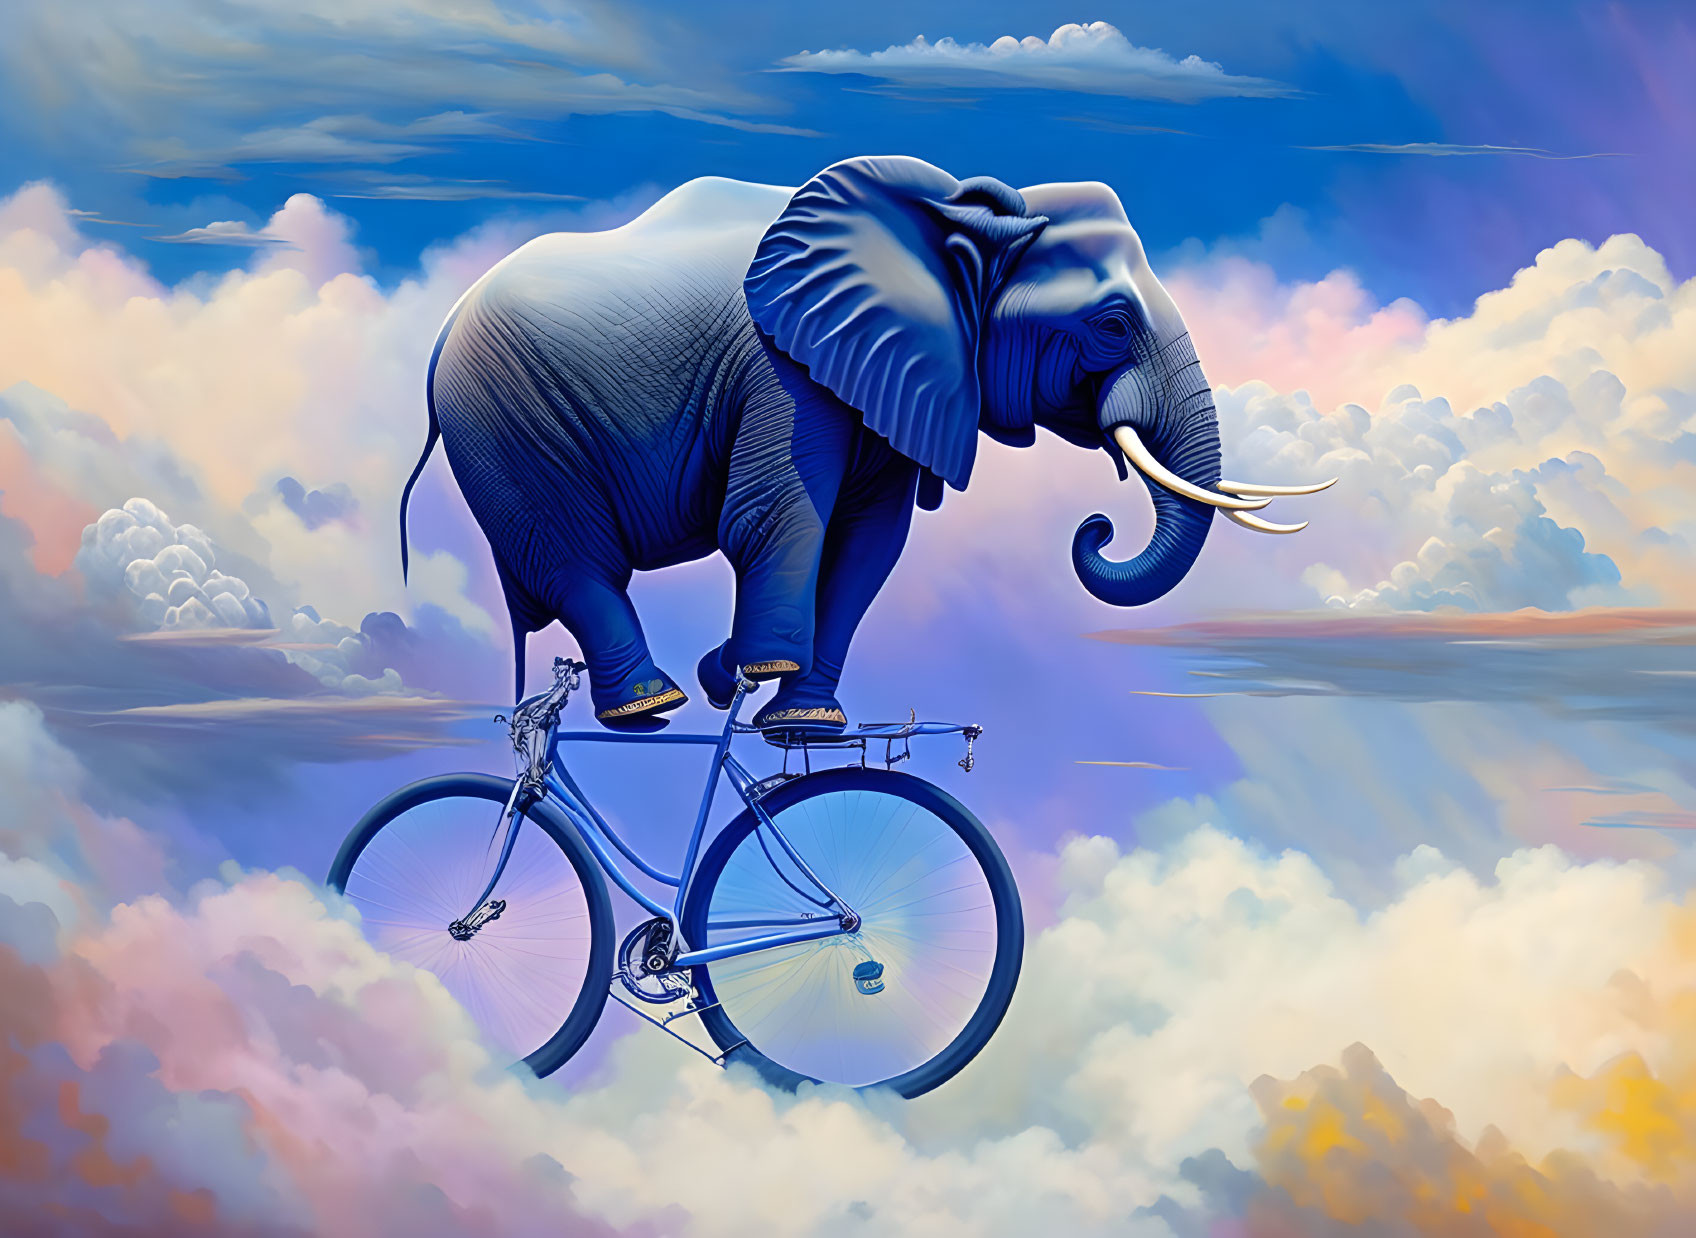 Whimsical elephant on bicycle in surreal sky